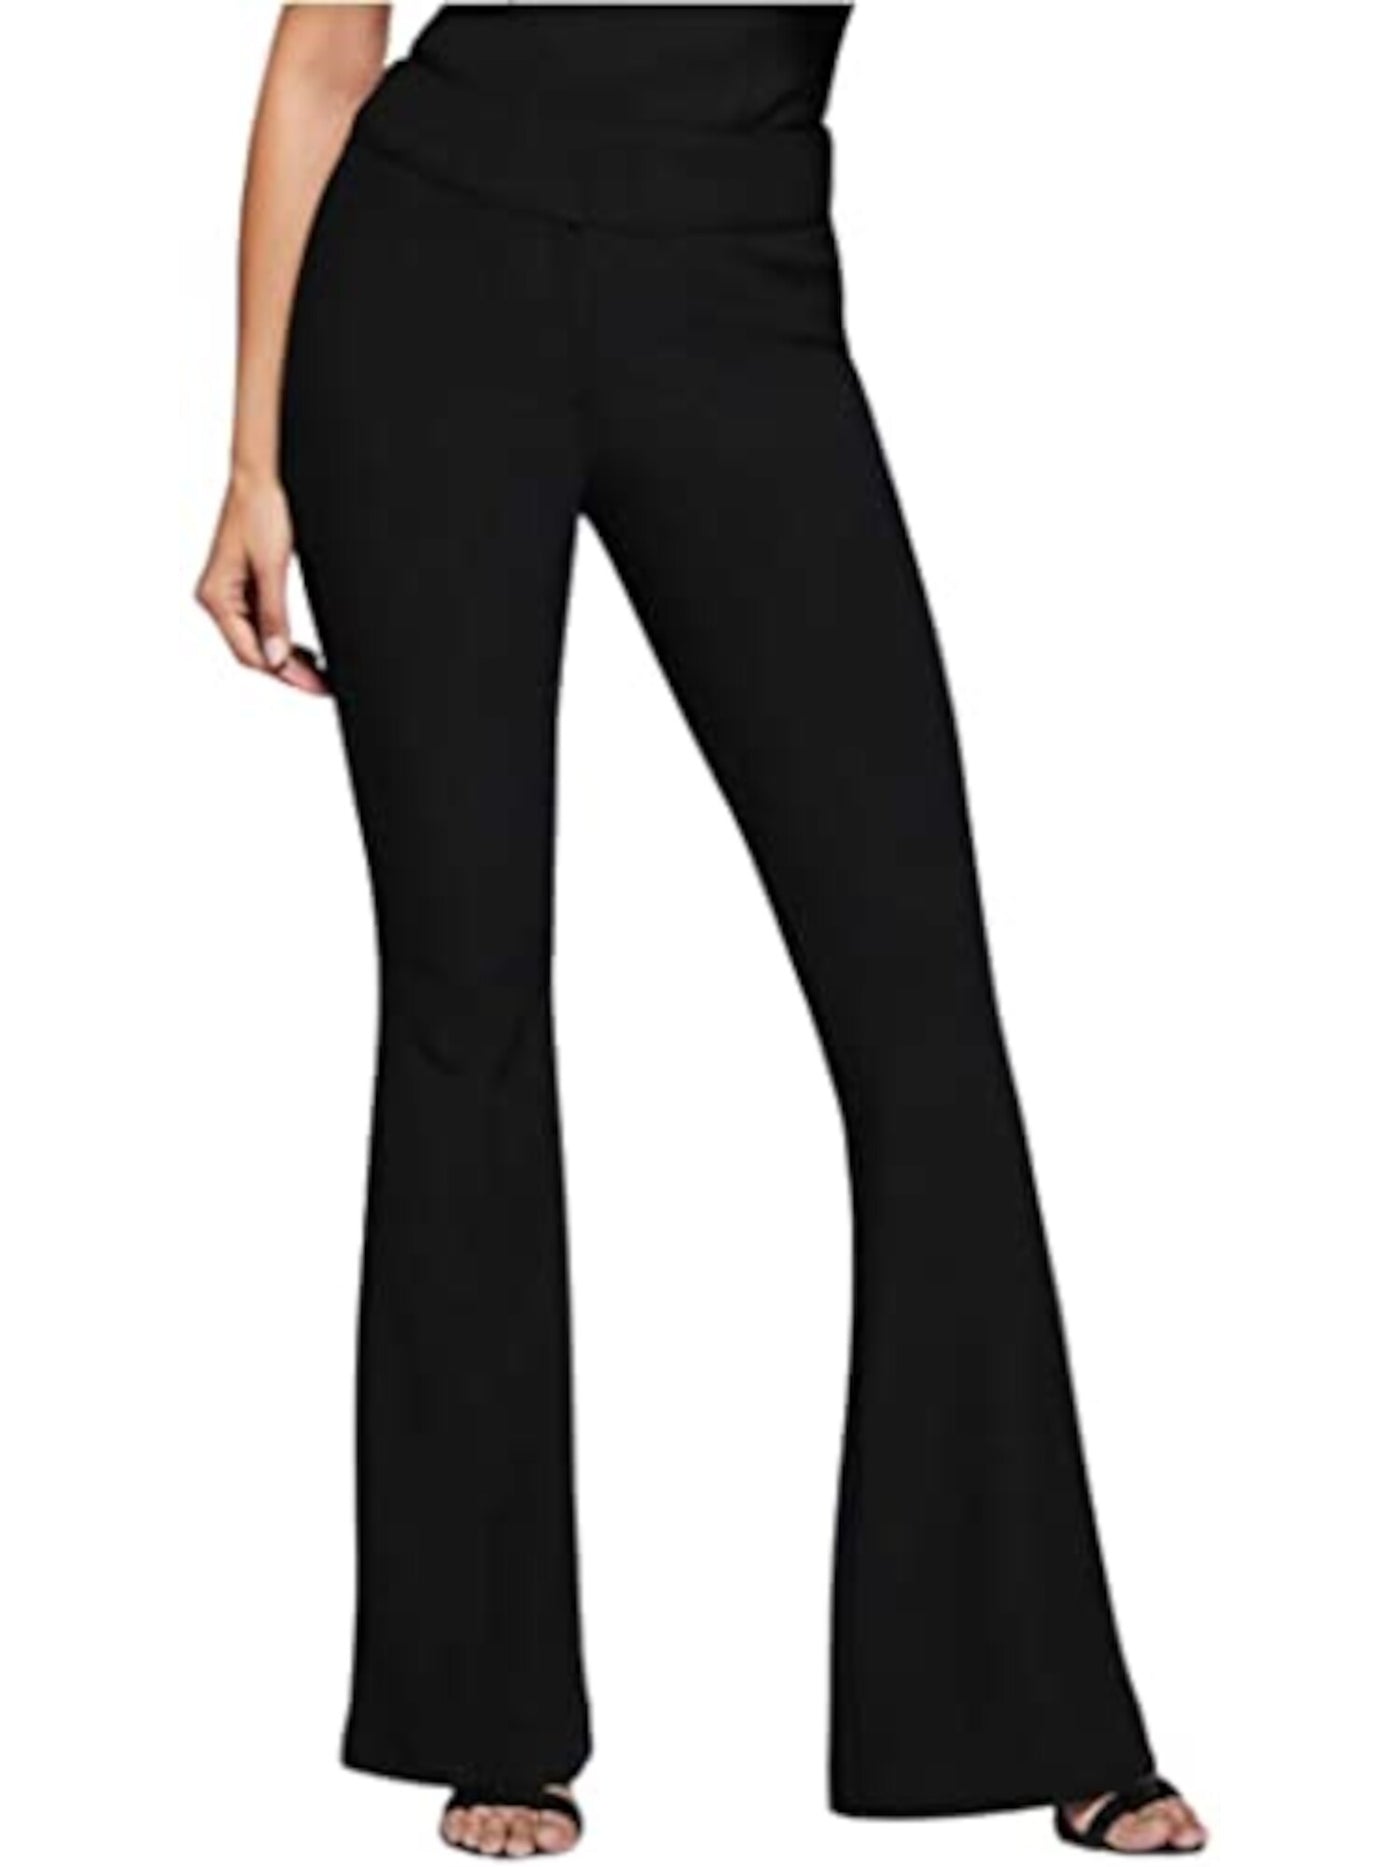 MARCIANO Womens Black Pocketed Zippered Wear To Work Flare Pants XS